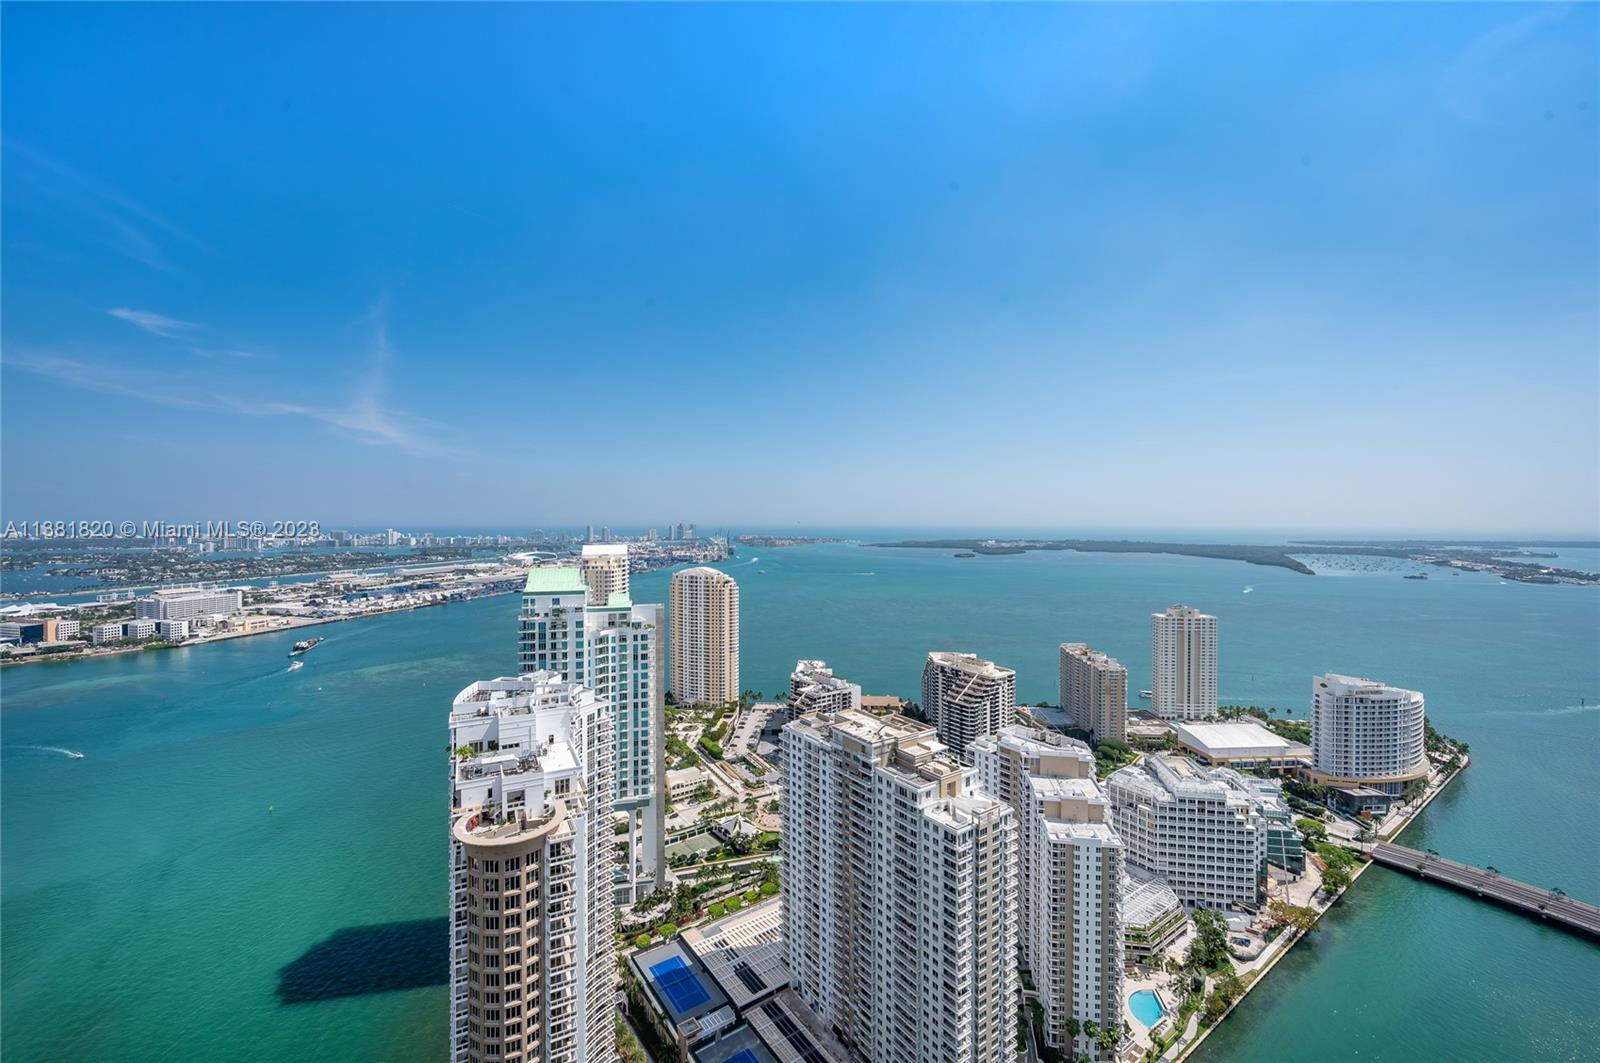 Introducing an extraordinary new listing for sale at the ICON BRICKELL TOWER 1. This remarkable condo offers a feeling of being in the clouds, with its breathtaking views of the bay & ocean that will leave you mesmerized. As you step into this fully furnished home, you will be captivated by the luxurious atmosphere. The unit is elegantly furnished. The bedroom's are tranquil sanctuaries that offer unparalleled views of the water. The den is a versatile space that can be used as a home office or even an additional bedroom. Located in the heart of Brickell, this condo is just steps away from some of the best restaurants, shops, and entertainment. Don't miss a chance to won a piece of paradise in the sky at the ICON BRICKELL. Contact us today.